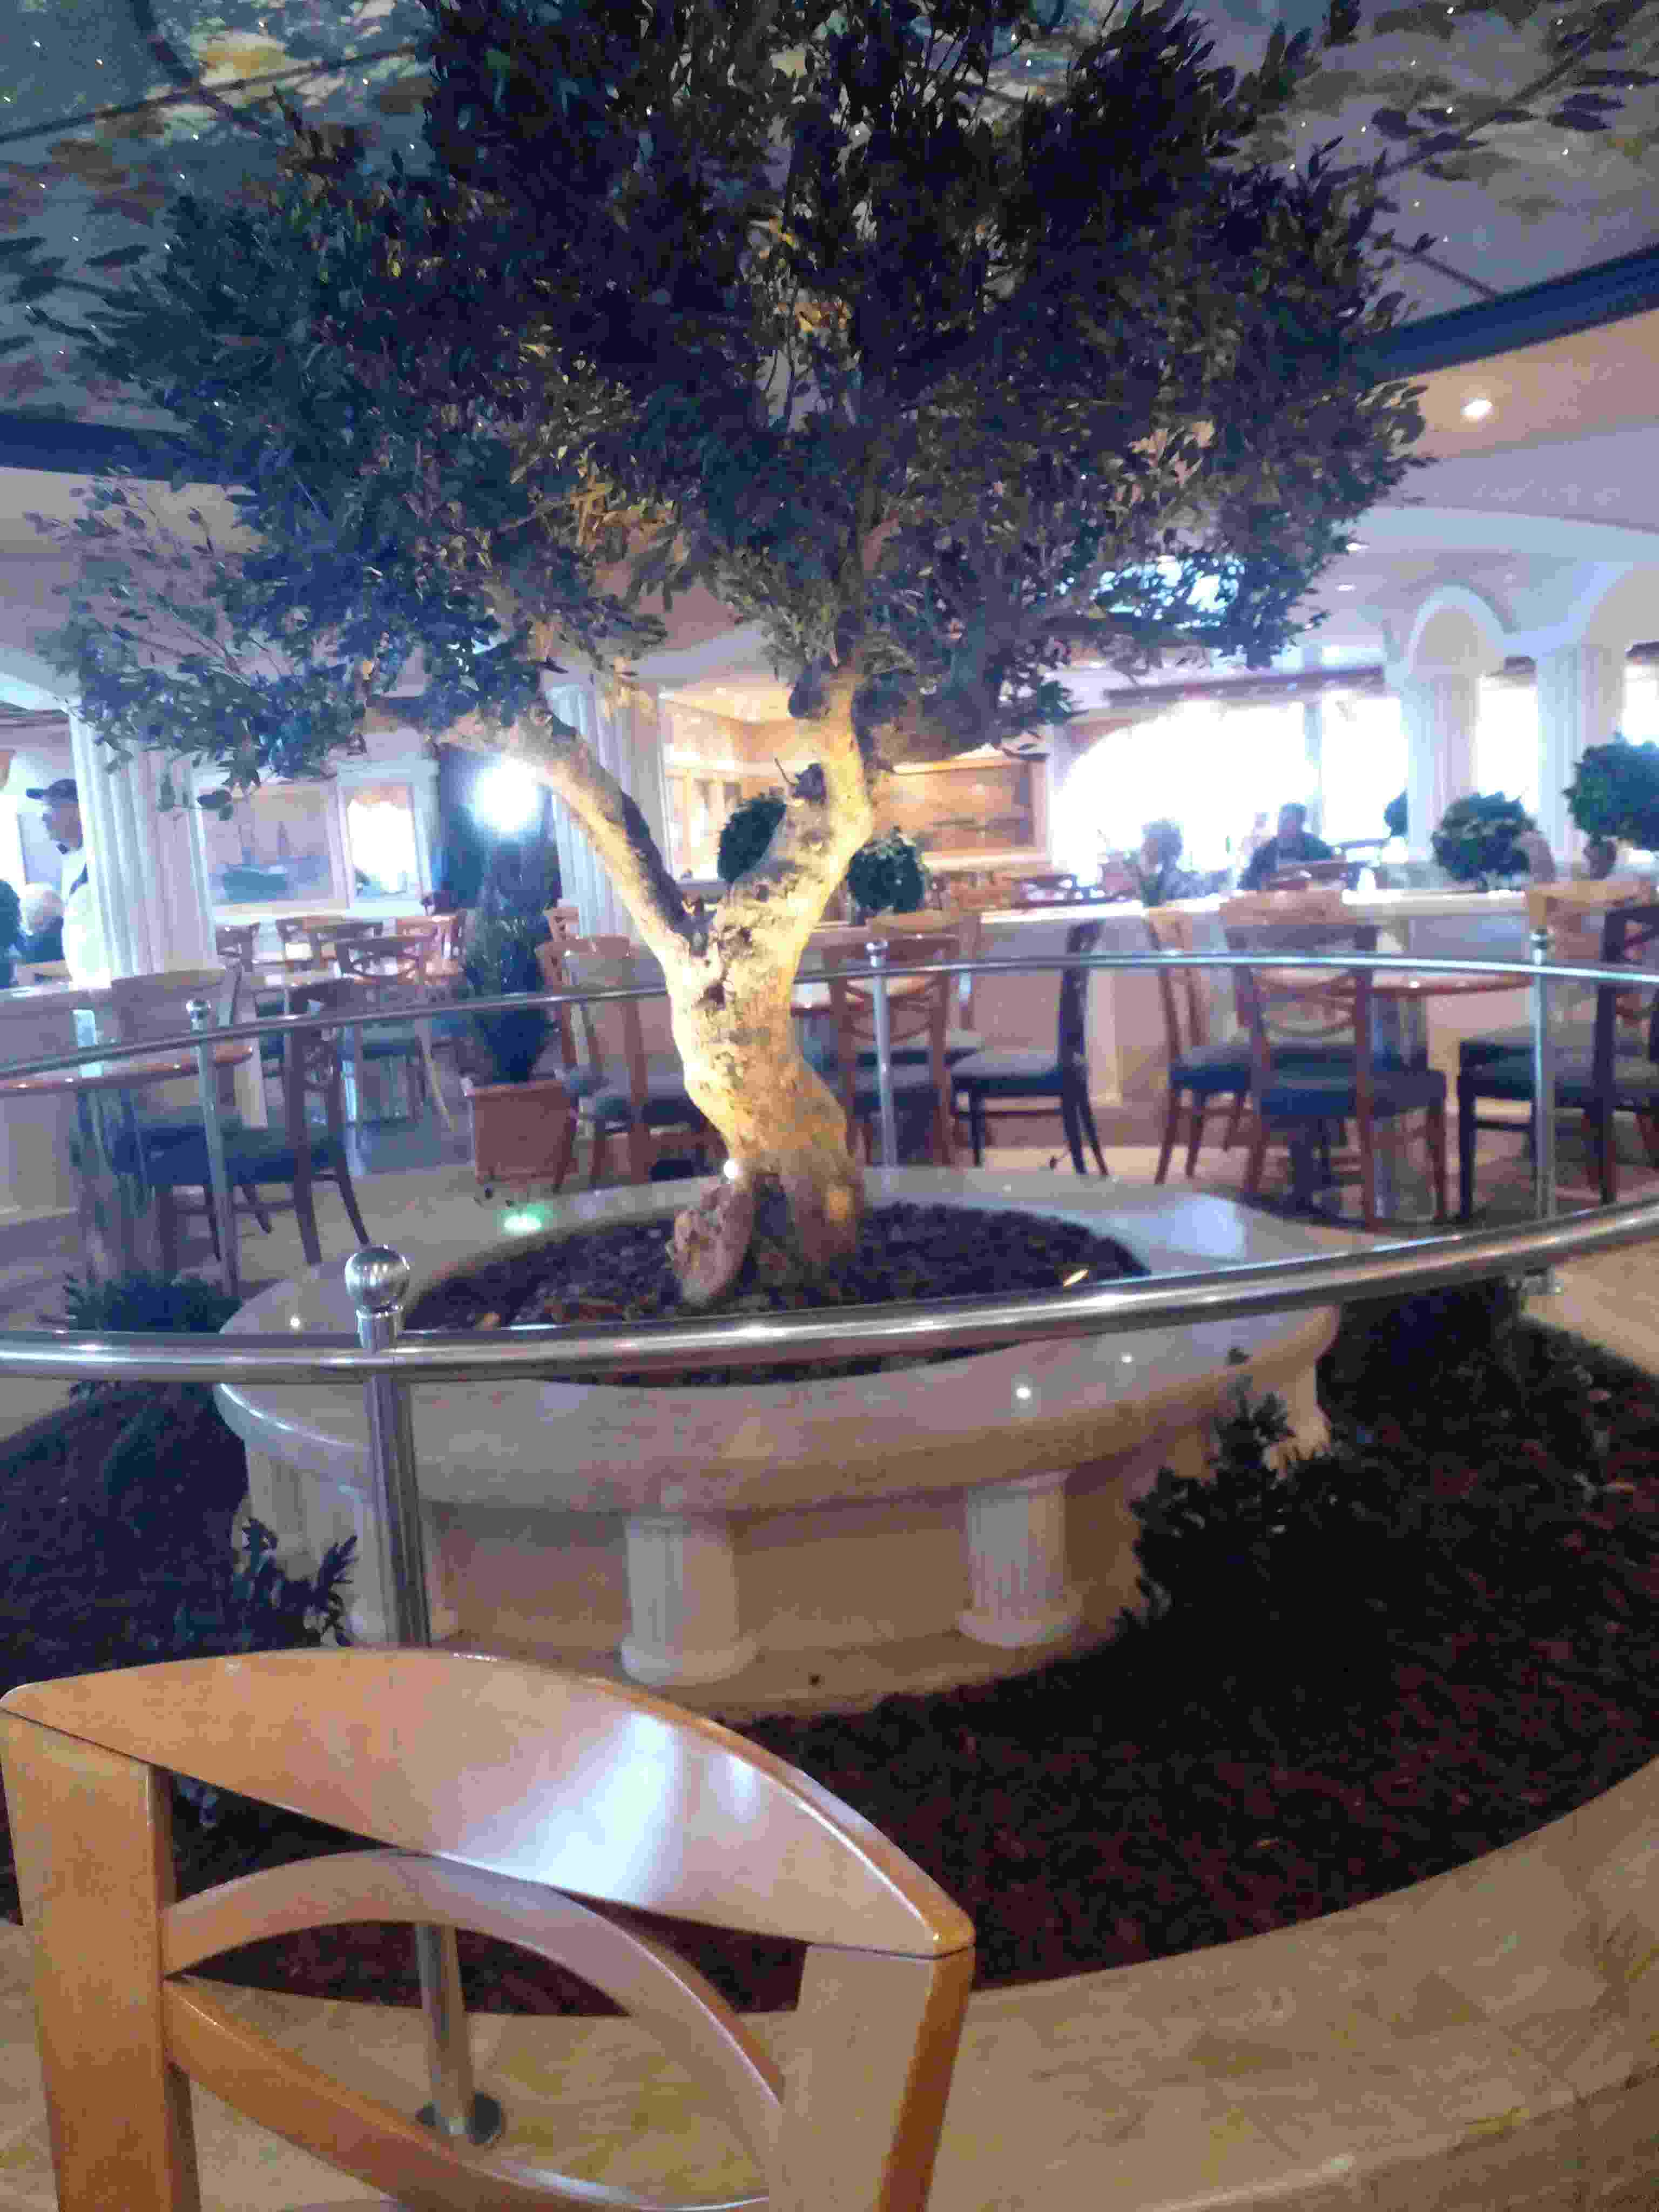 Surrounded by chairs, a small tree dominates one of the corners of the buffet. We usually hung out here with my wife.